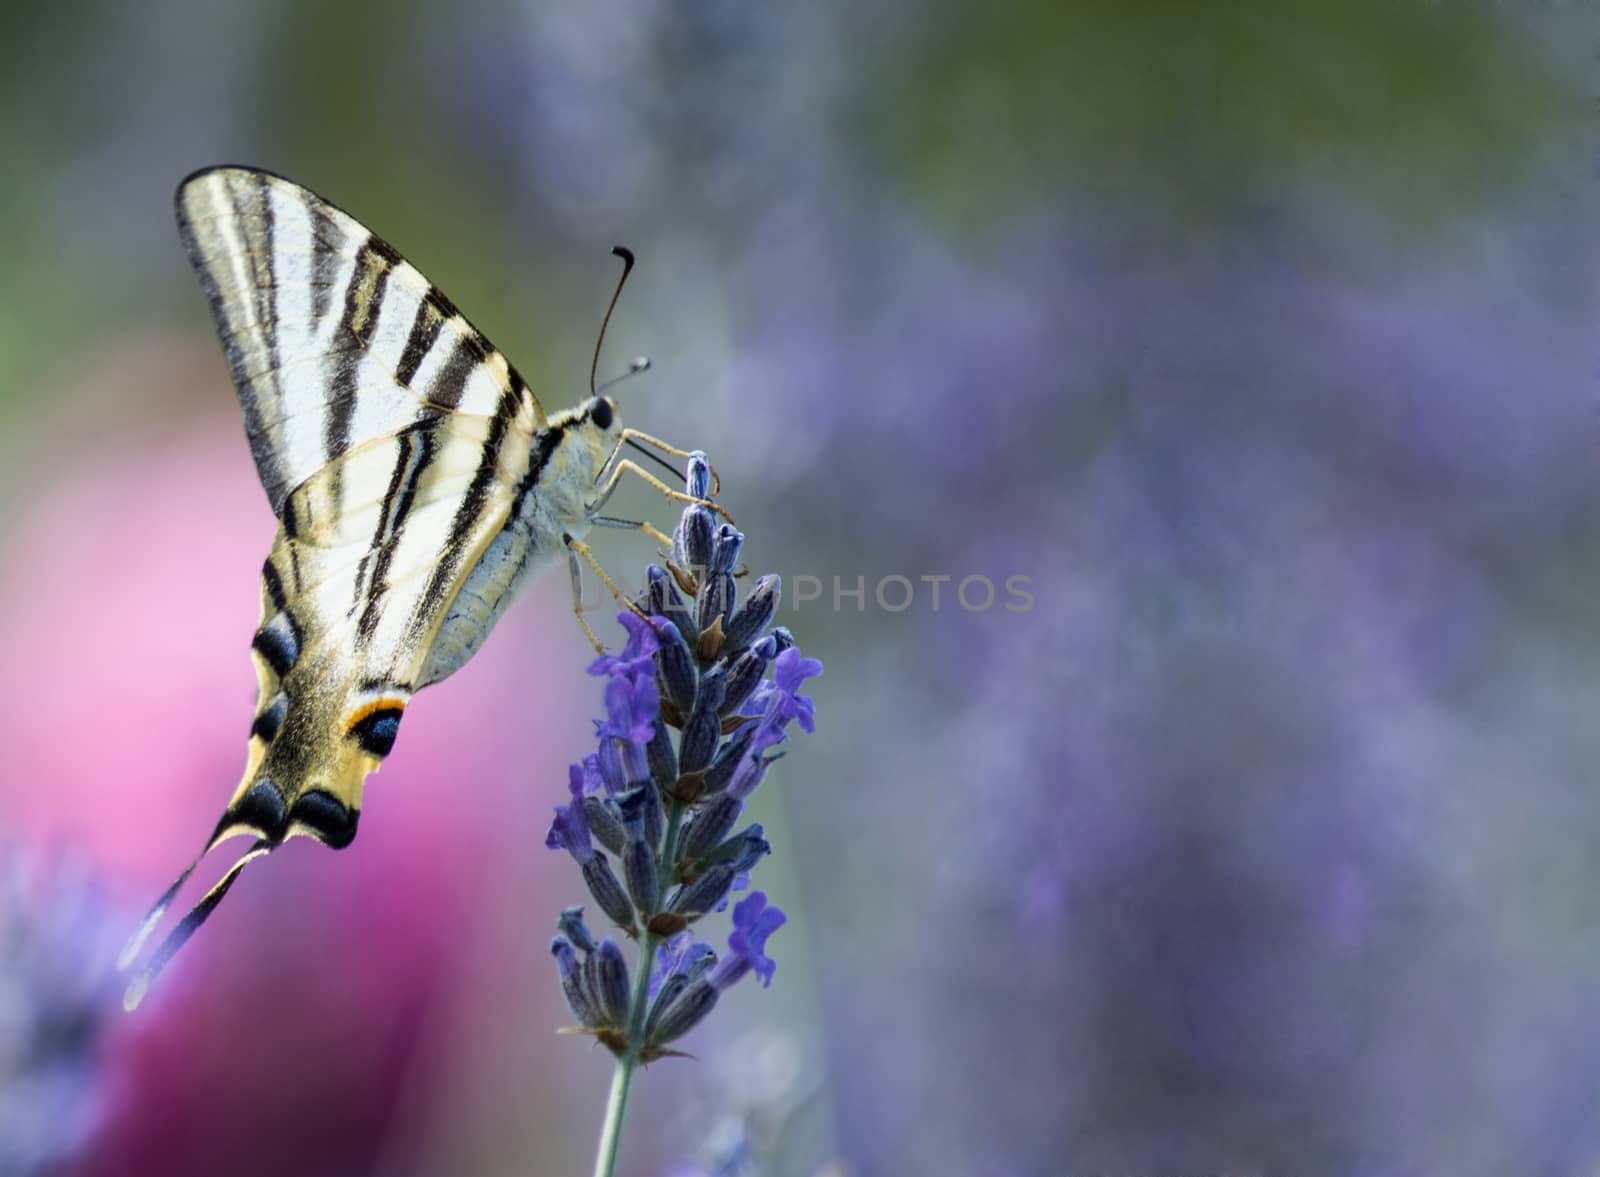  Close up of a Swallowtail butterfly feeding on flowers 